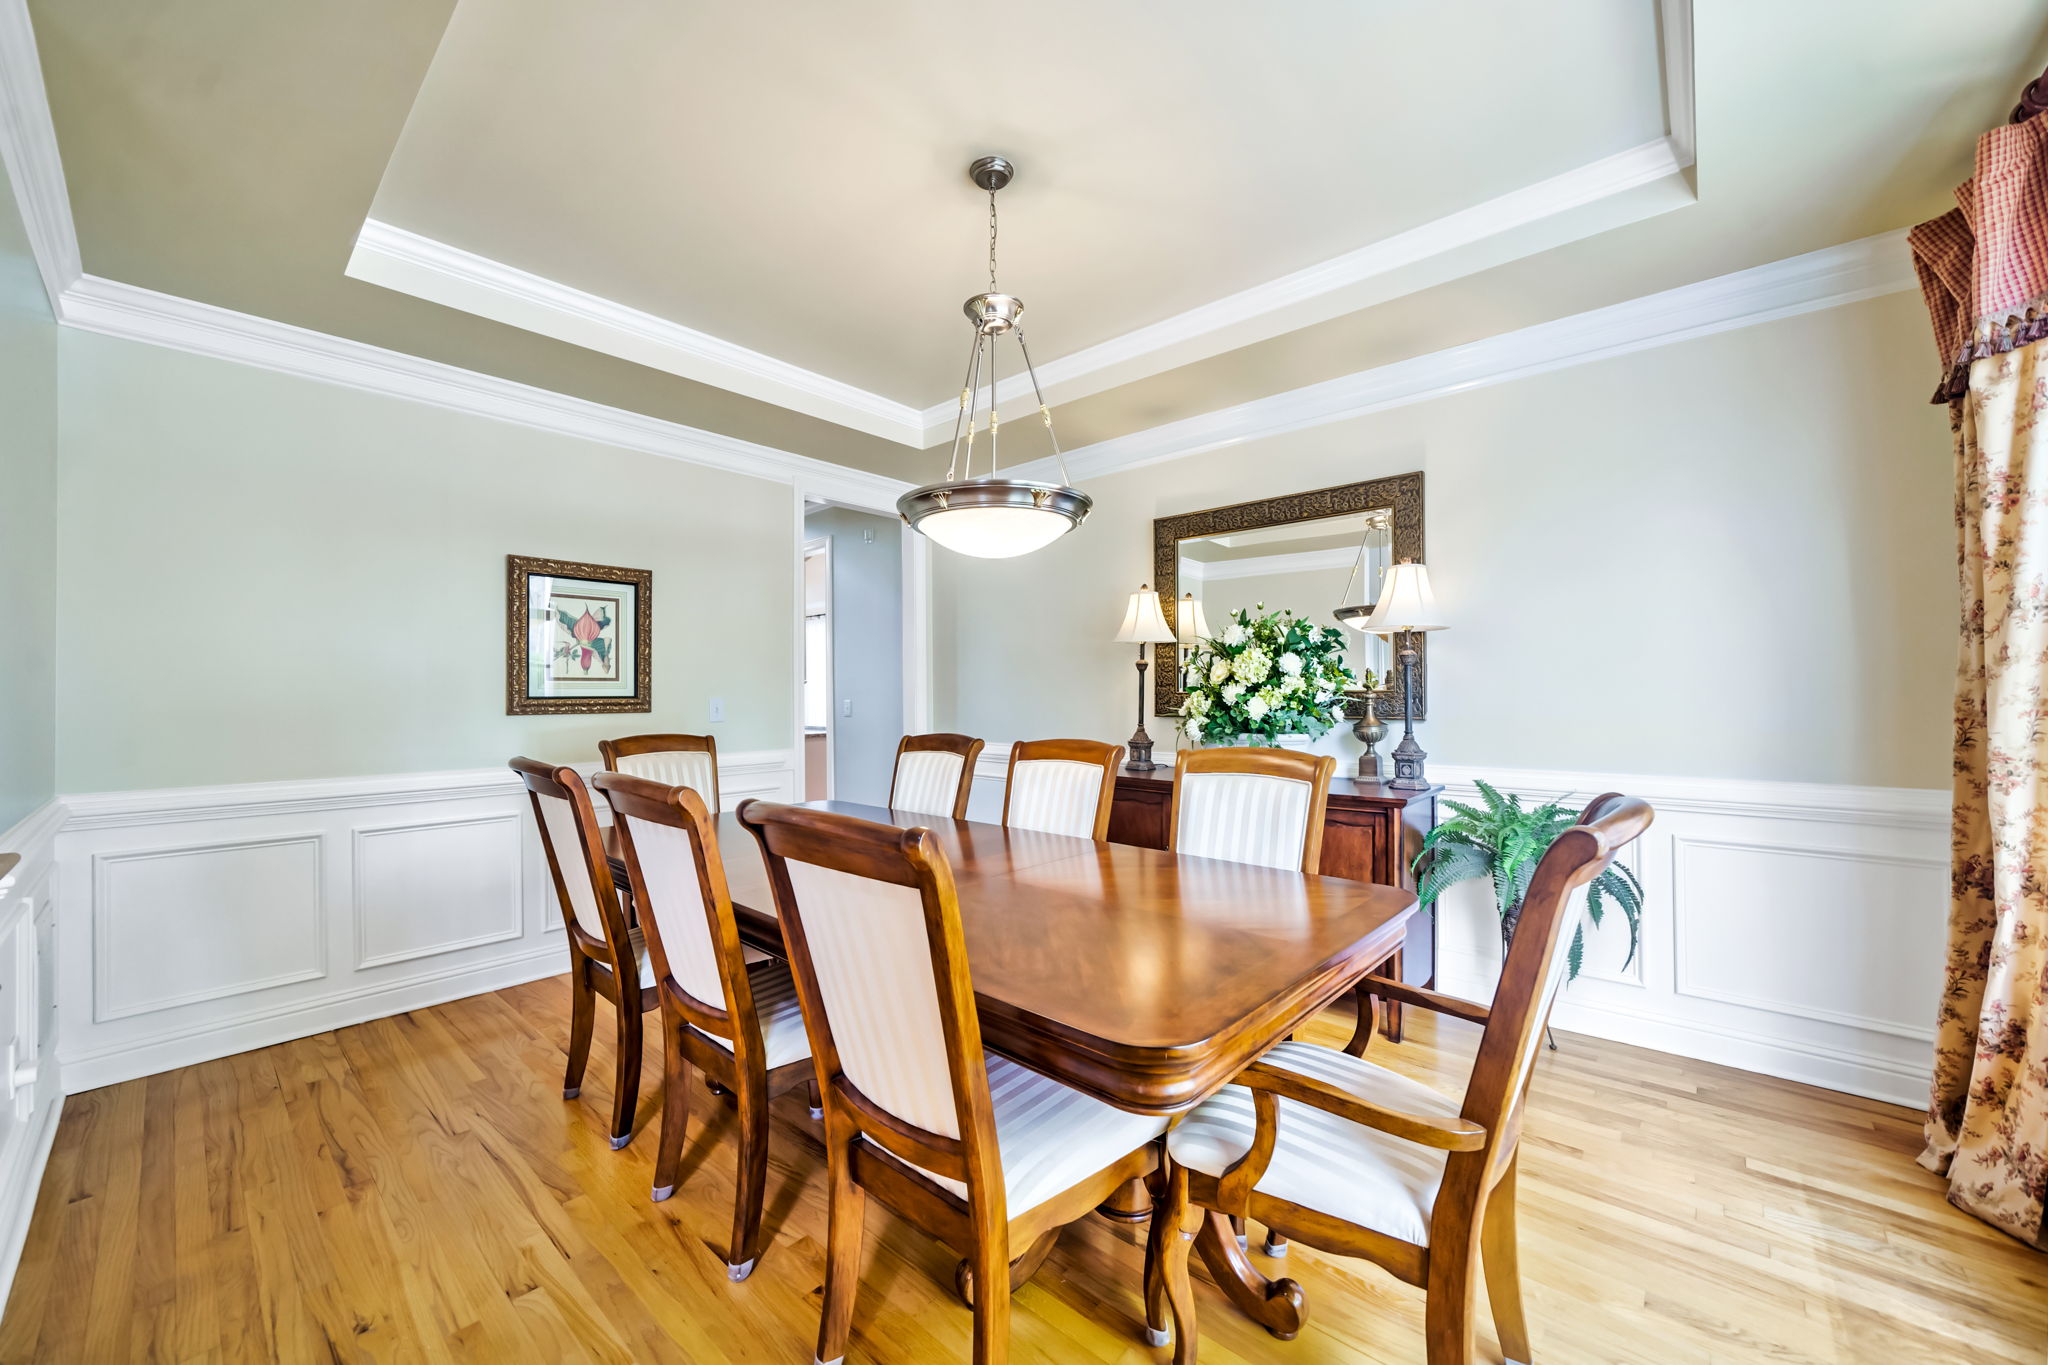 Banquet size dining room is perfect for your entertaining needs!